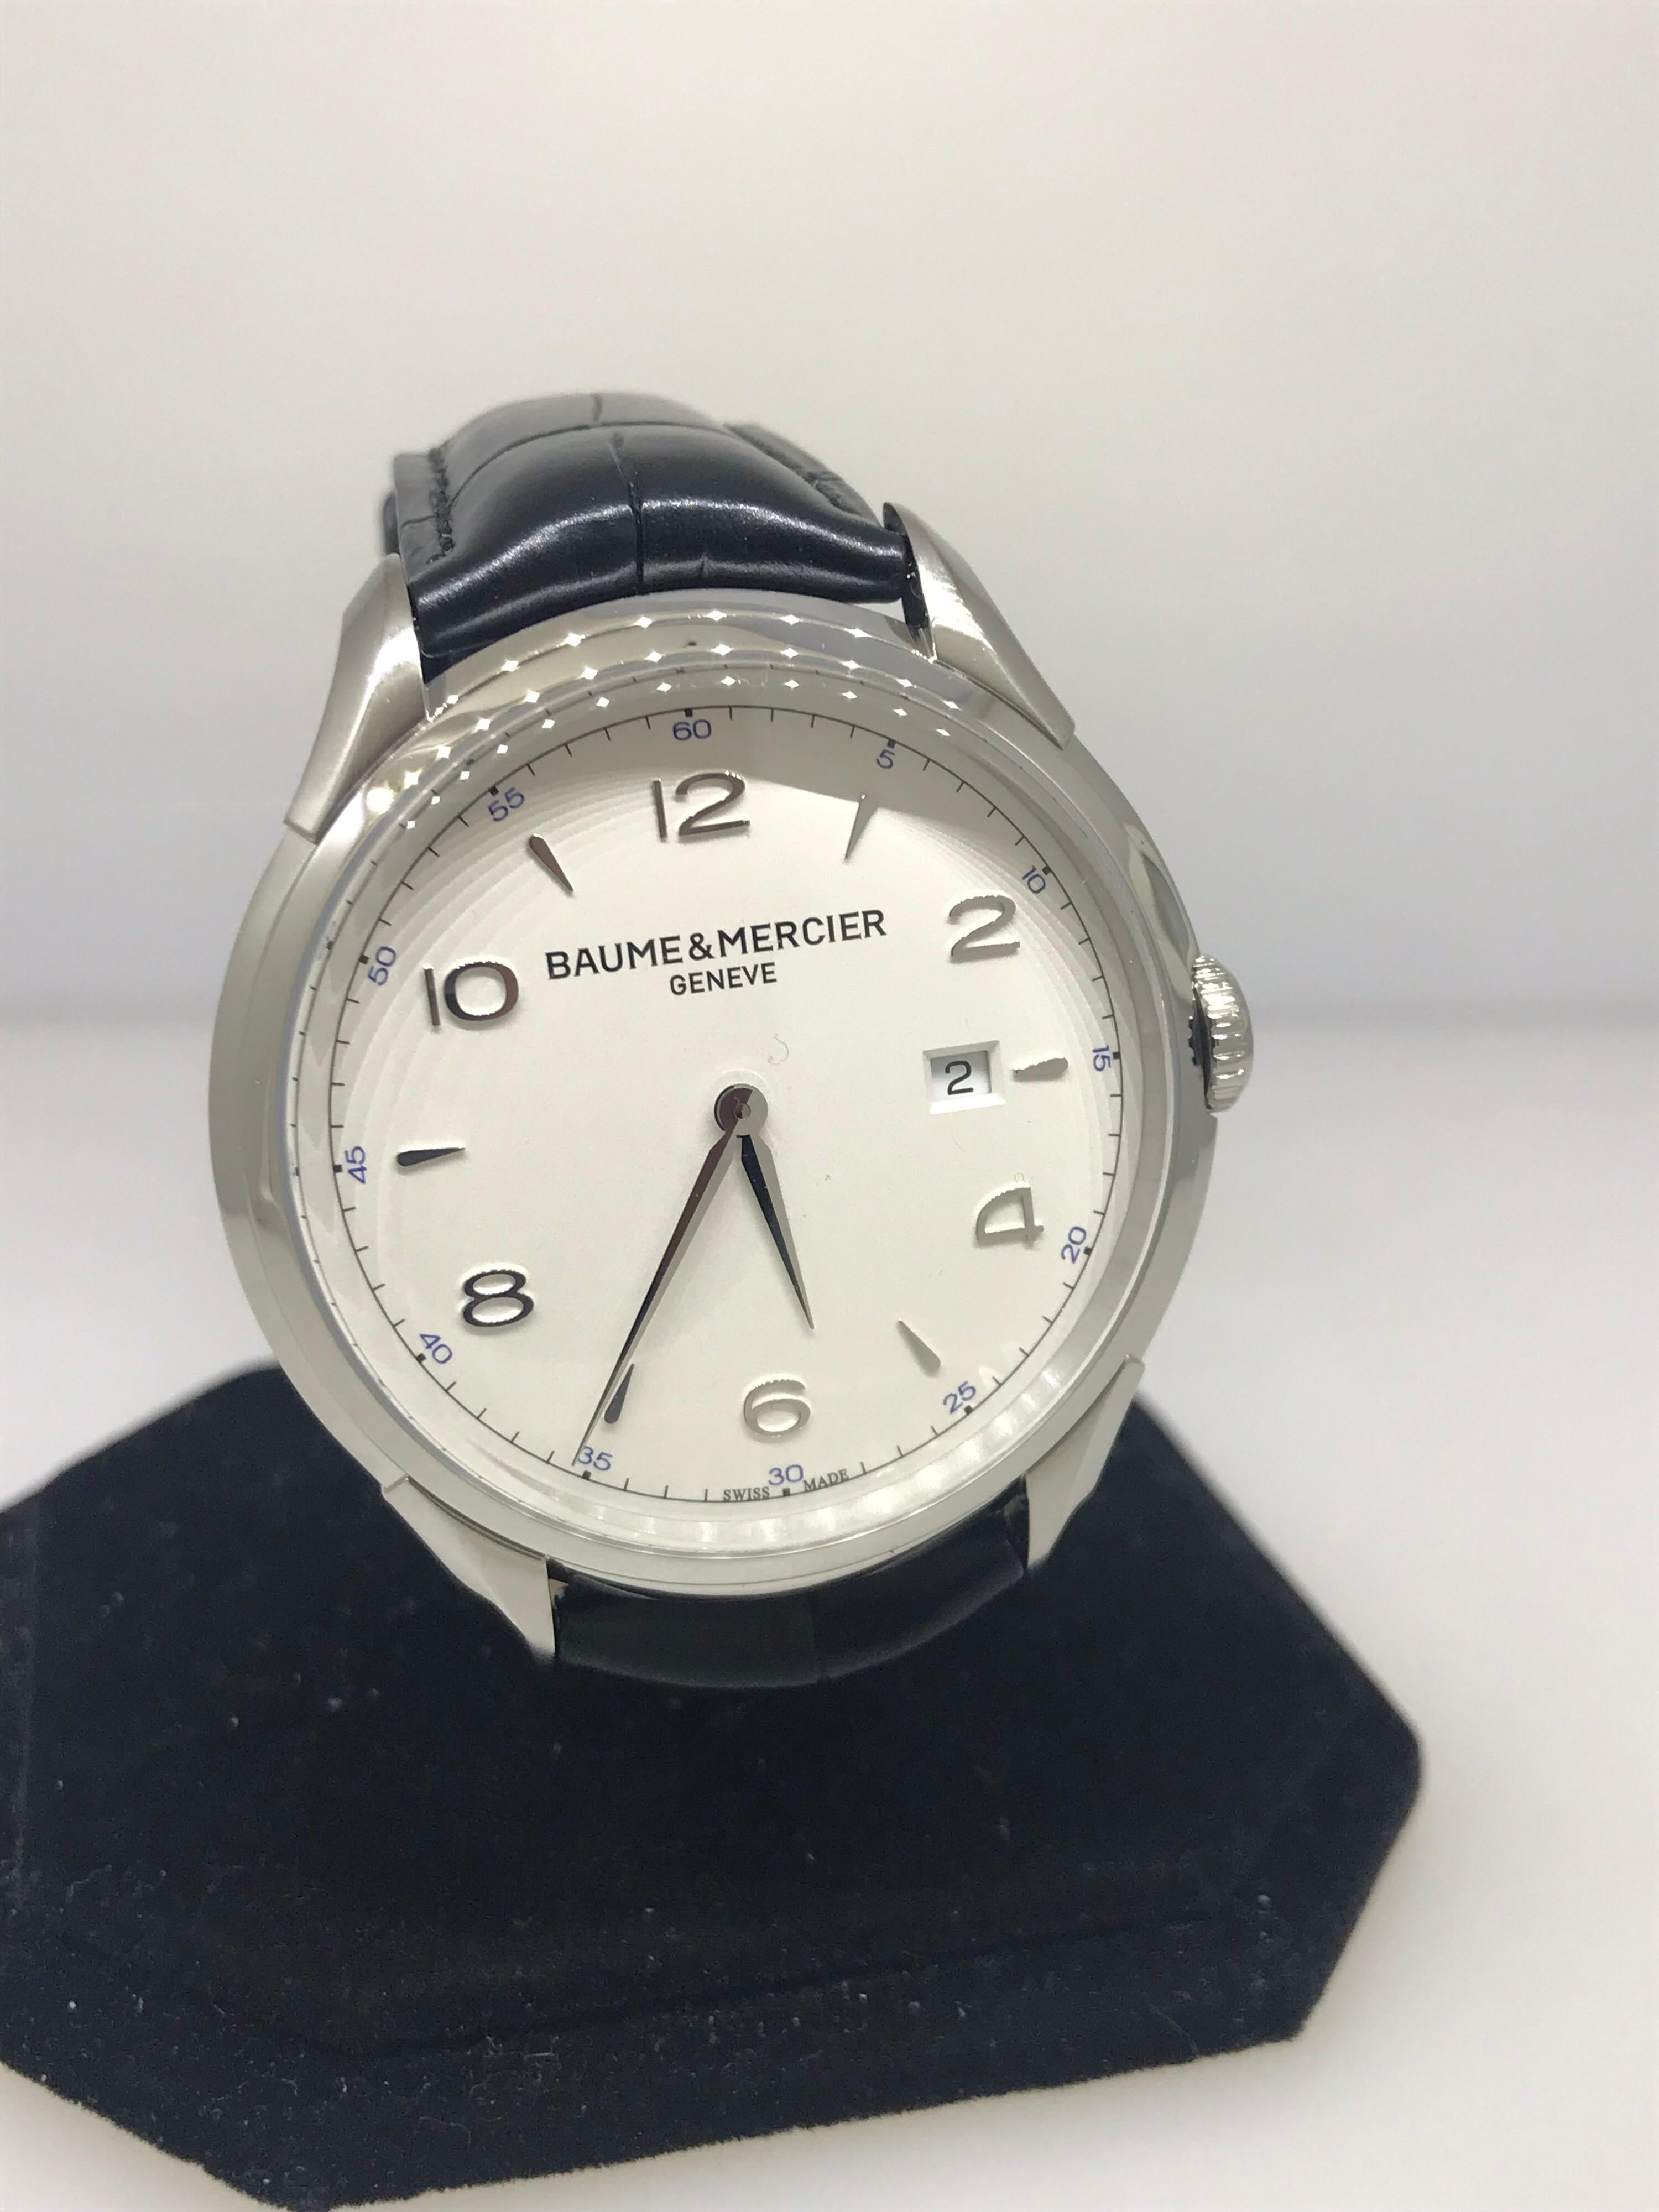 Baume & Mercier Clifton Men's Watch

Model Number: M0A10419

Brand New

Comes with original Baume & Mercier box, warranty card, and instruction manual

Stainless Steel Case & Buckle

Silver Dial

Arabic Numeral & Index Hour Markers

Quarts